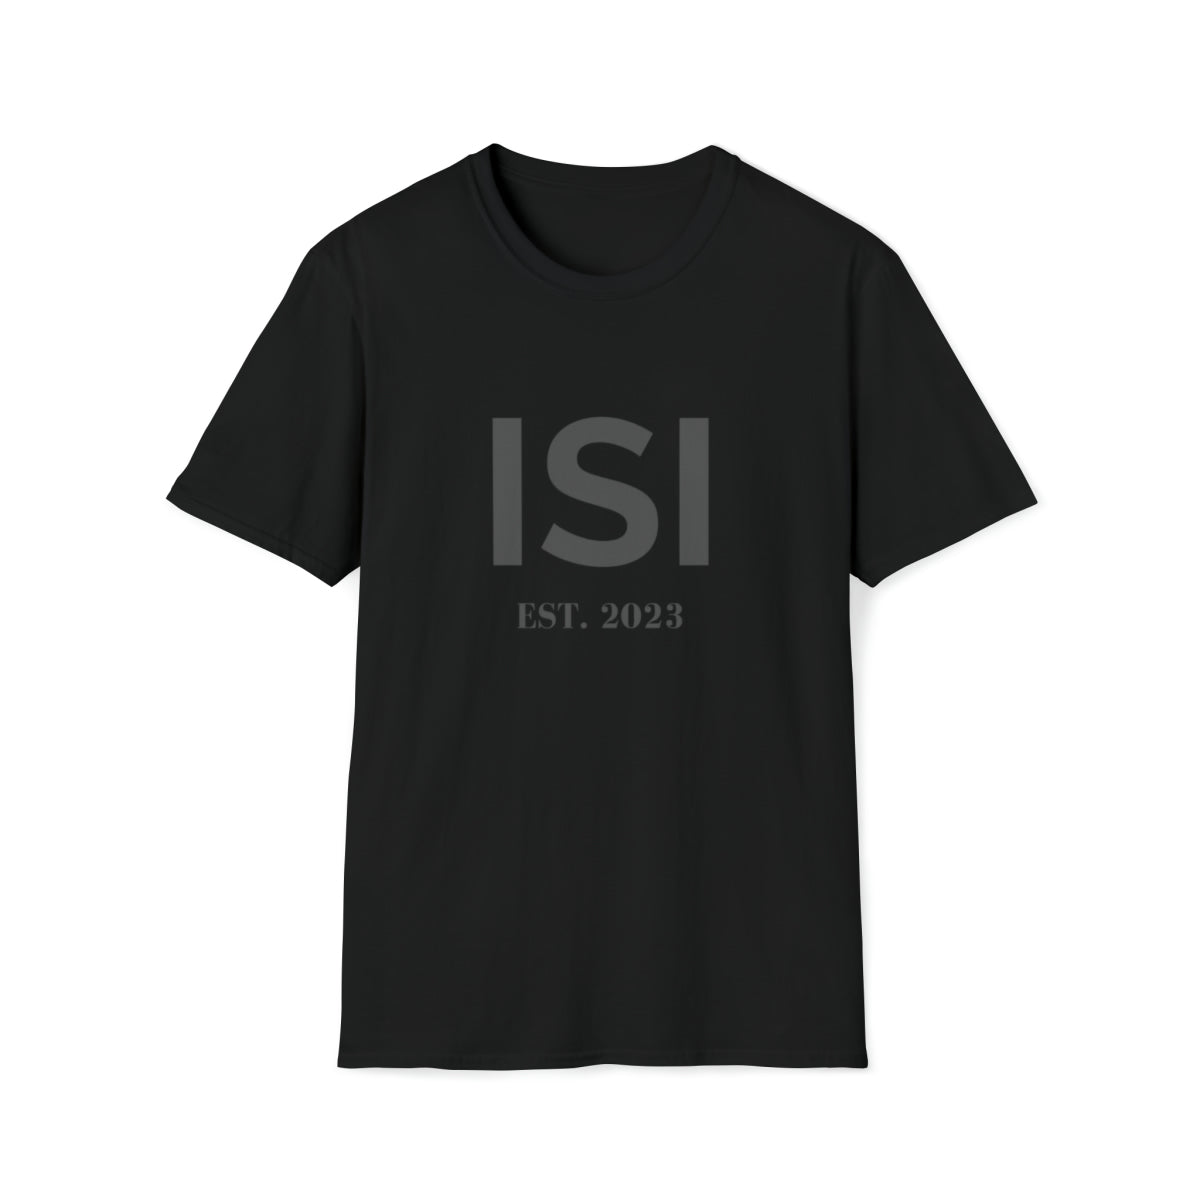 Isi est [year] T-Shirt